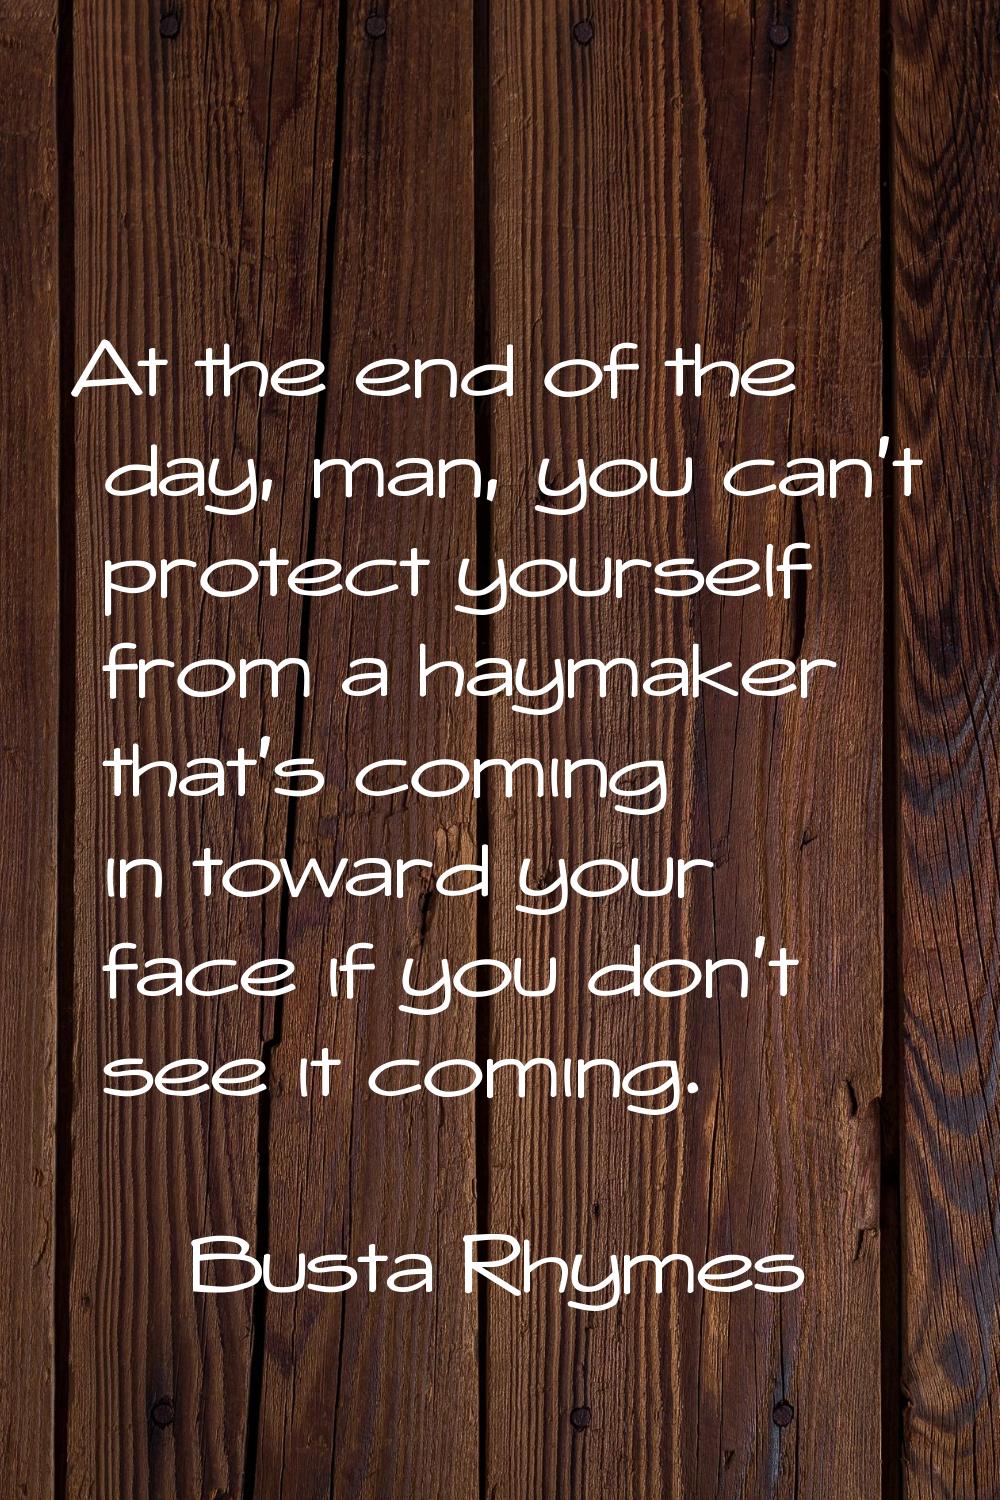 At the end of the day, man, you can't protect yourself from a haymaker that's coming in toward your